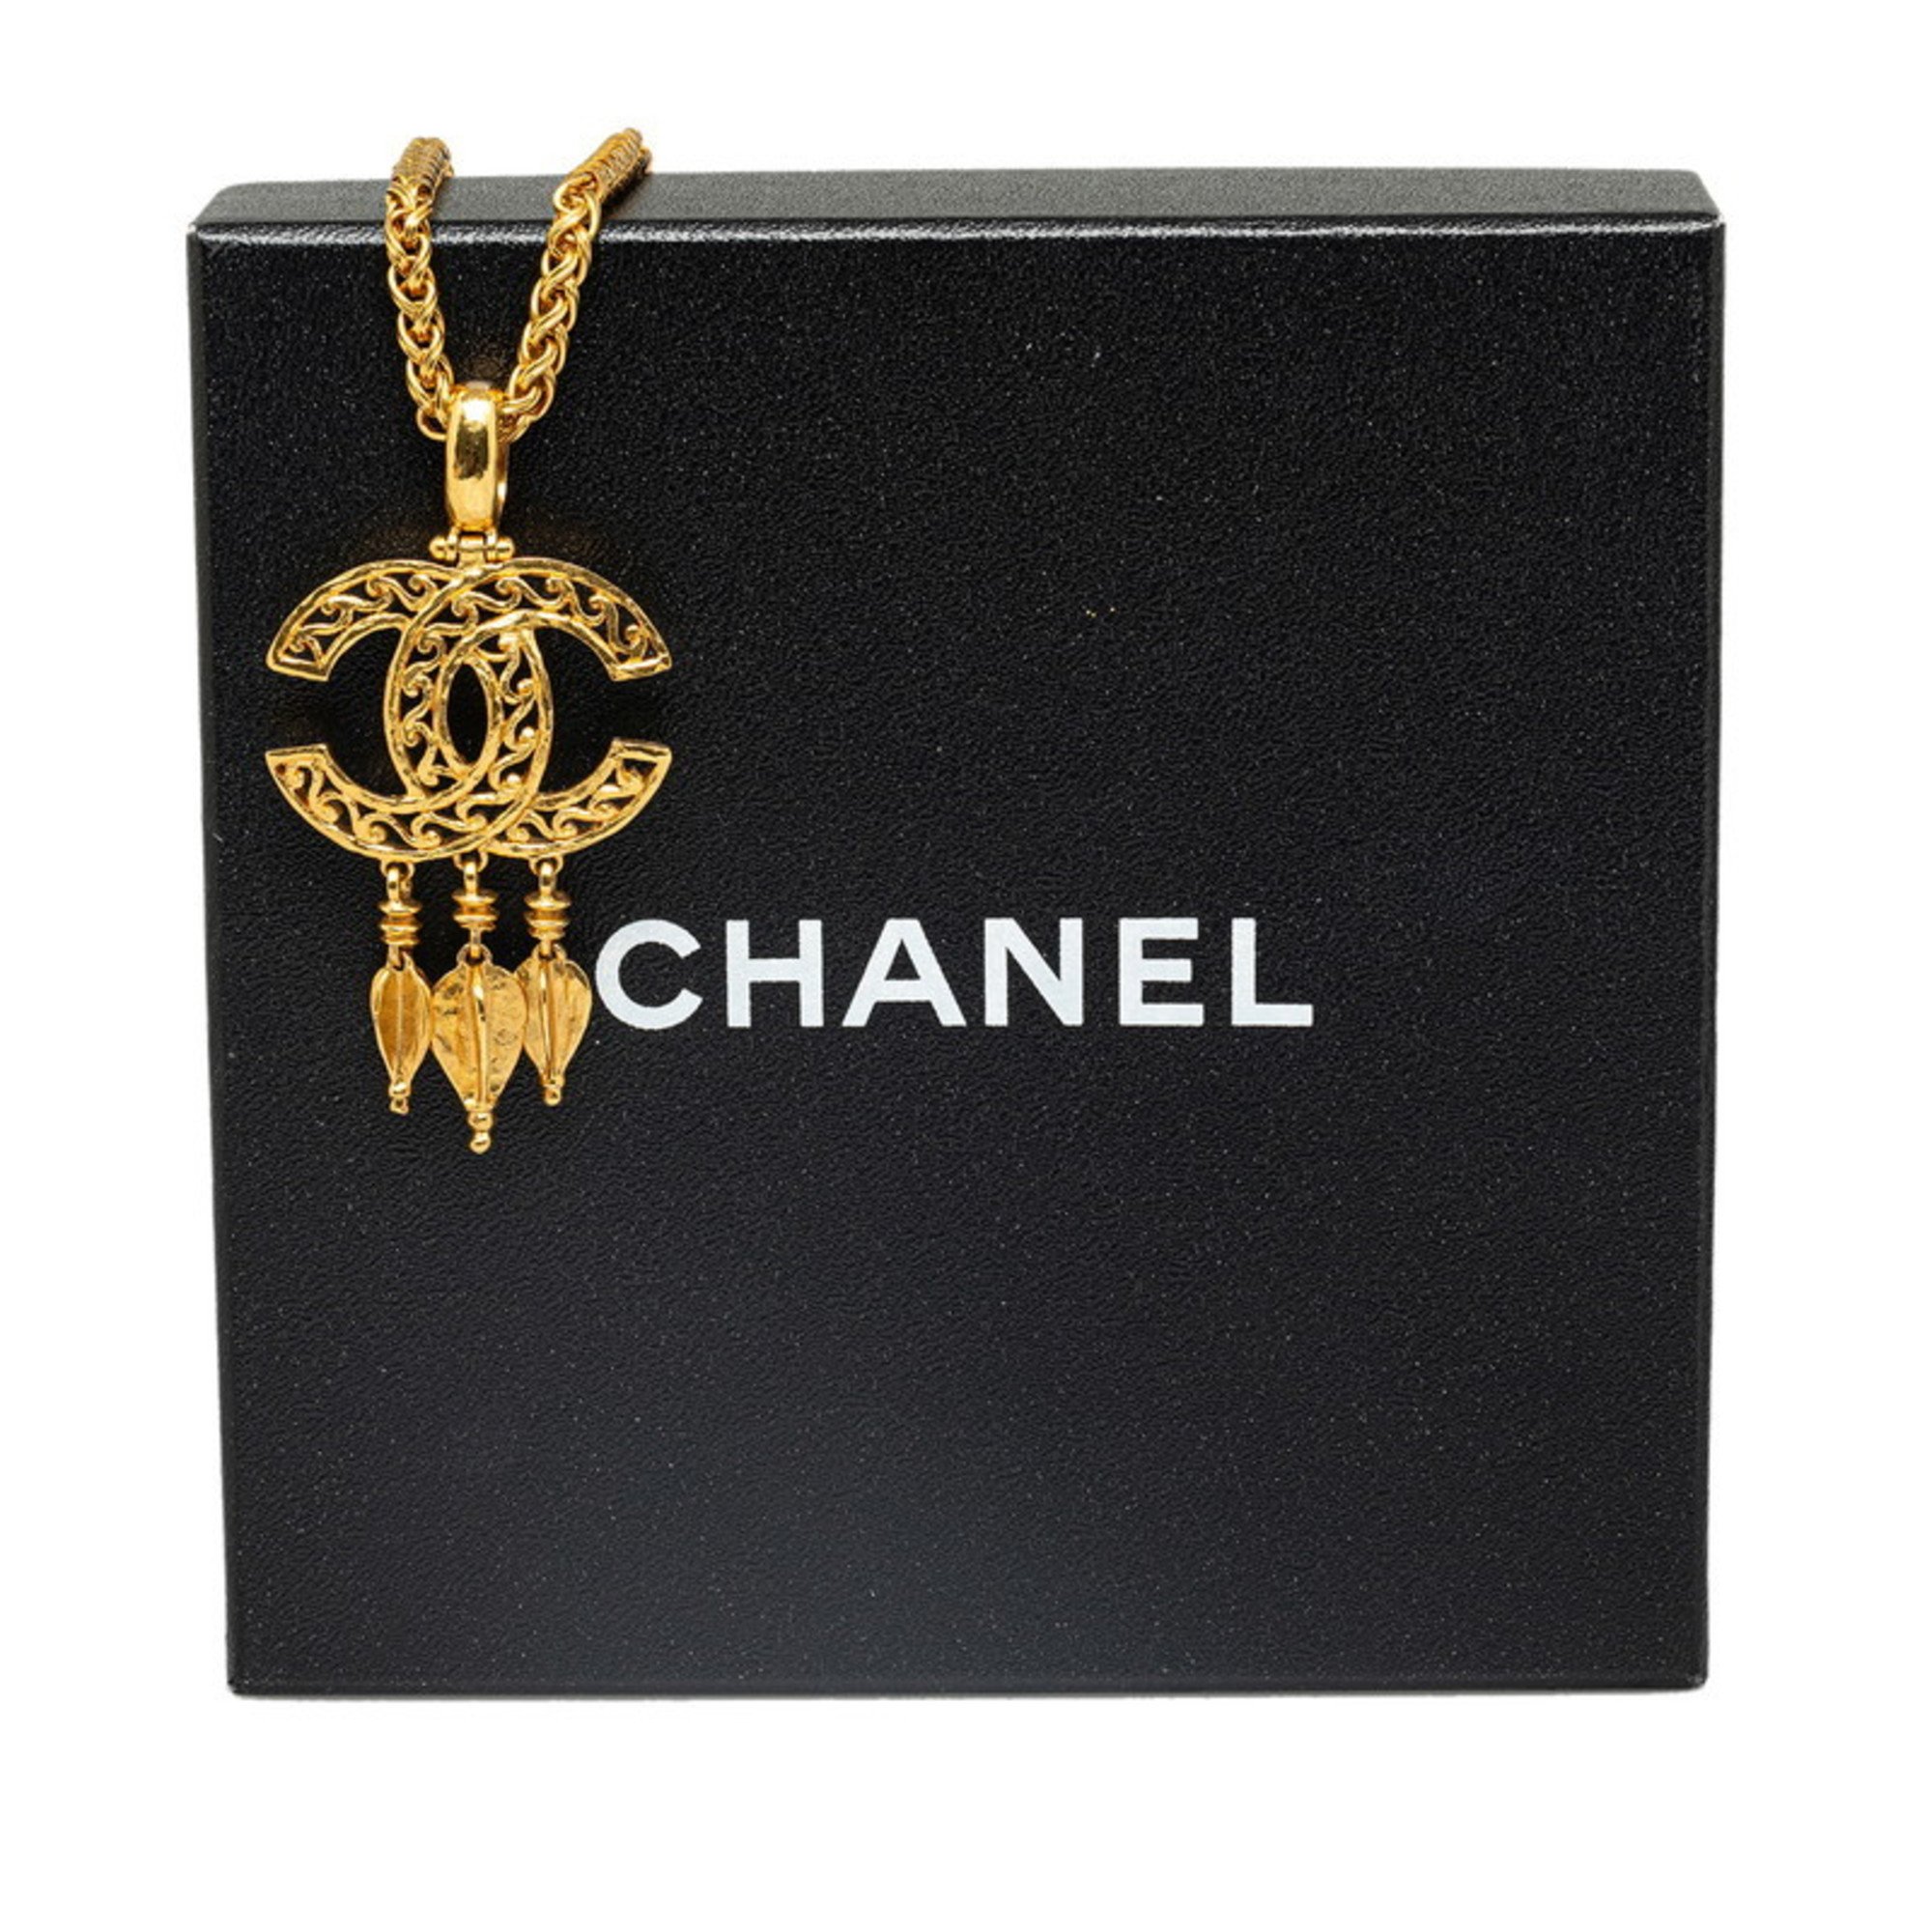 Chanel Coco Mark Swing Necklace Gold Plated Women's CHANEL